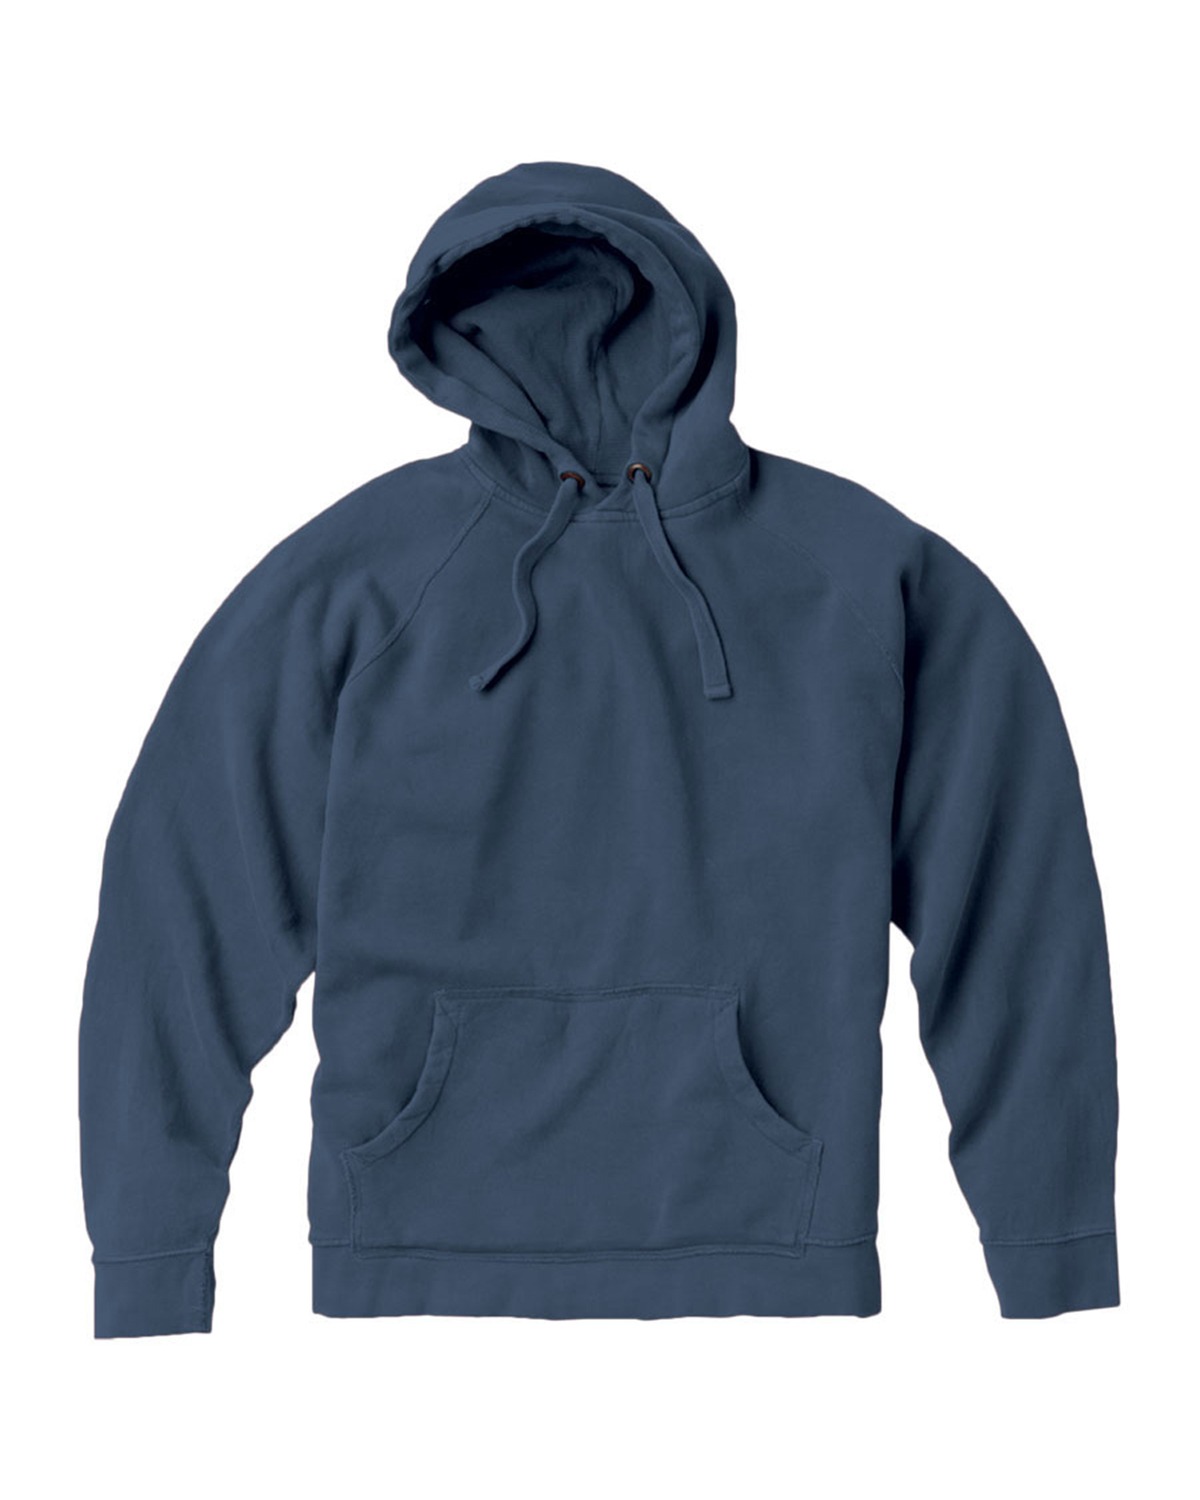 Classic Unisex Hoodie Comfort Colors 1567 (Made in US) - Print on demand